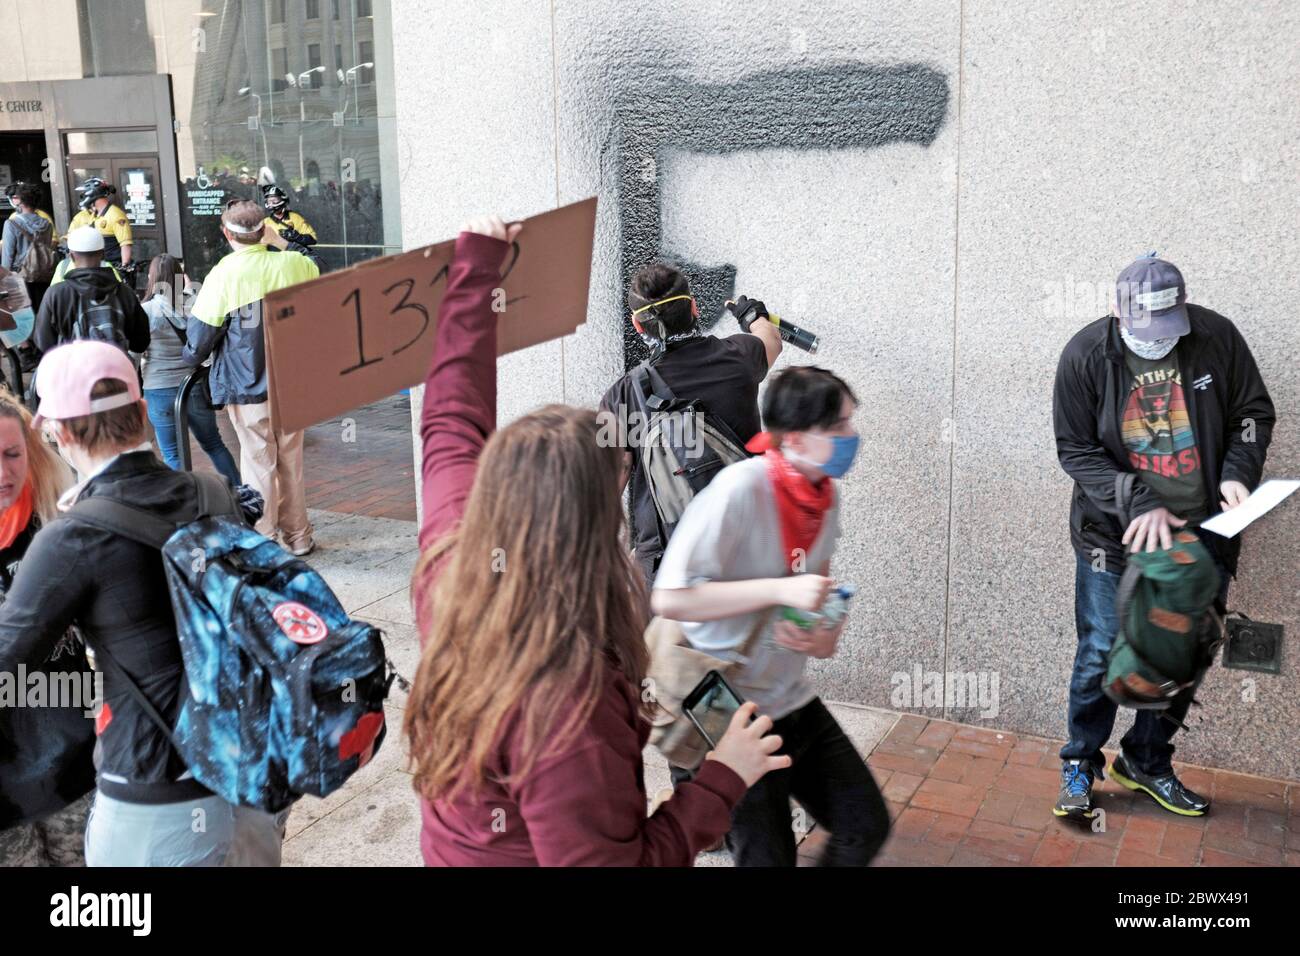 Mayhem ensues at the entrance to the Cleveland Justice Center in Cleveland, Ohio, USA as a protester tags the building. Stock Photo